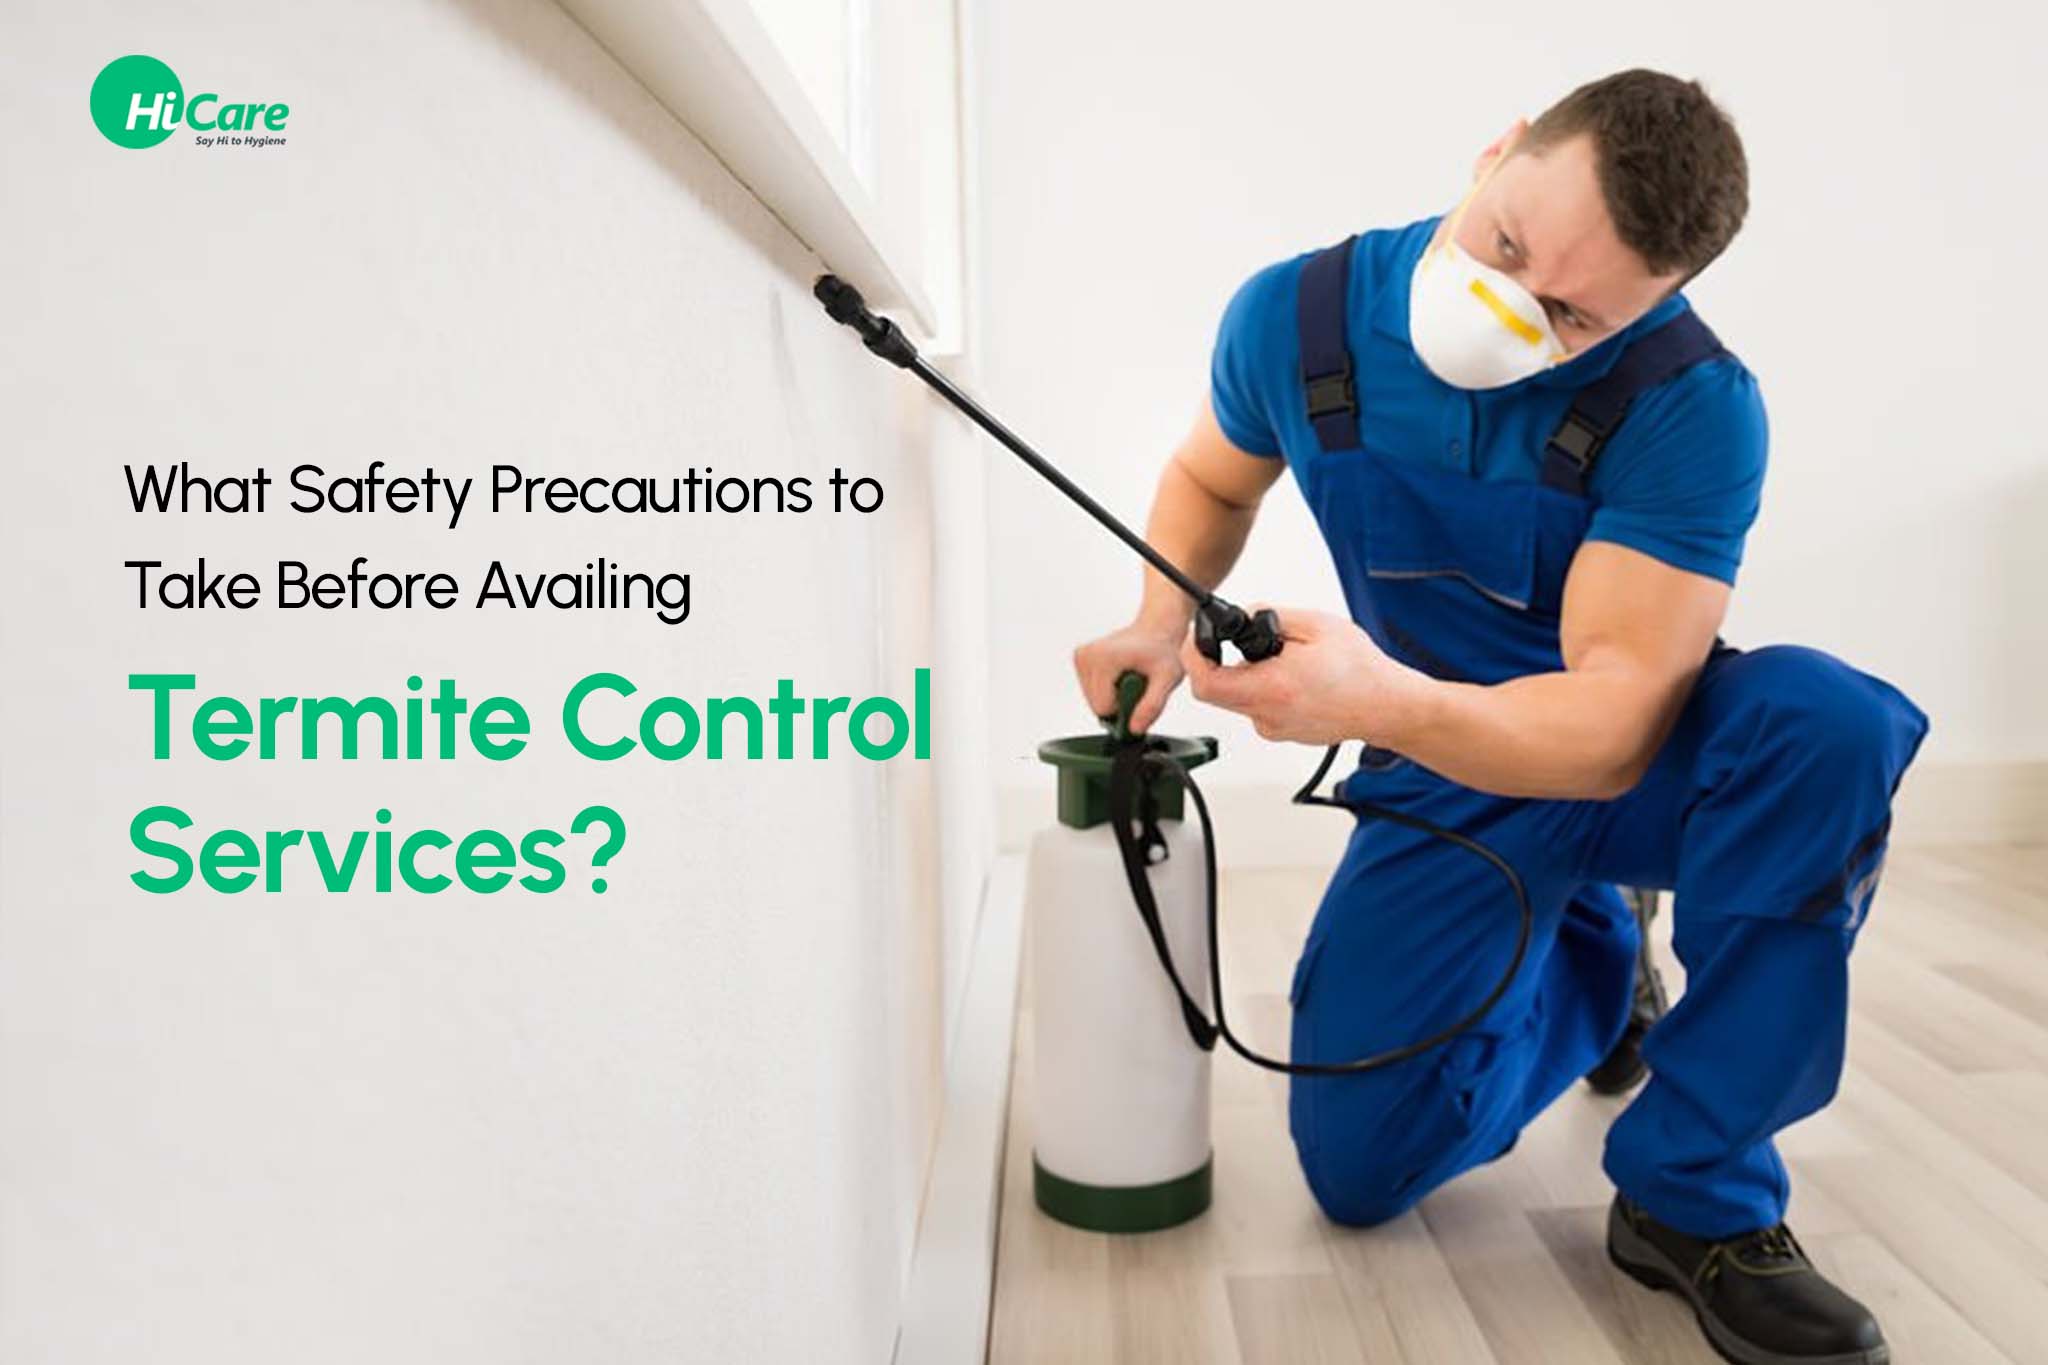 What Safety Precautions to Take Before Availing Termite Control Services?